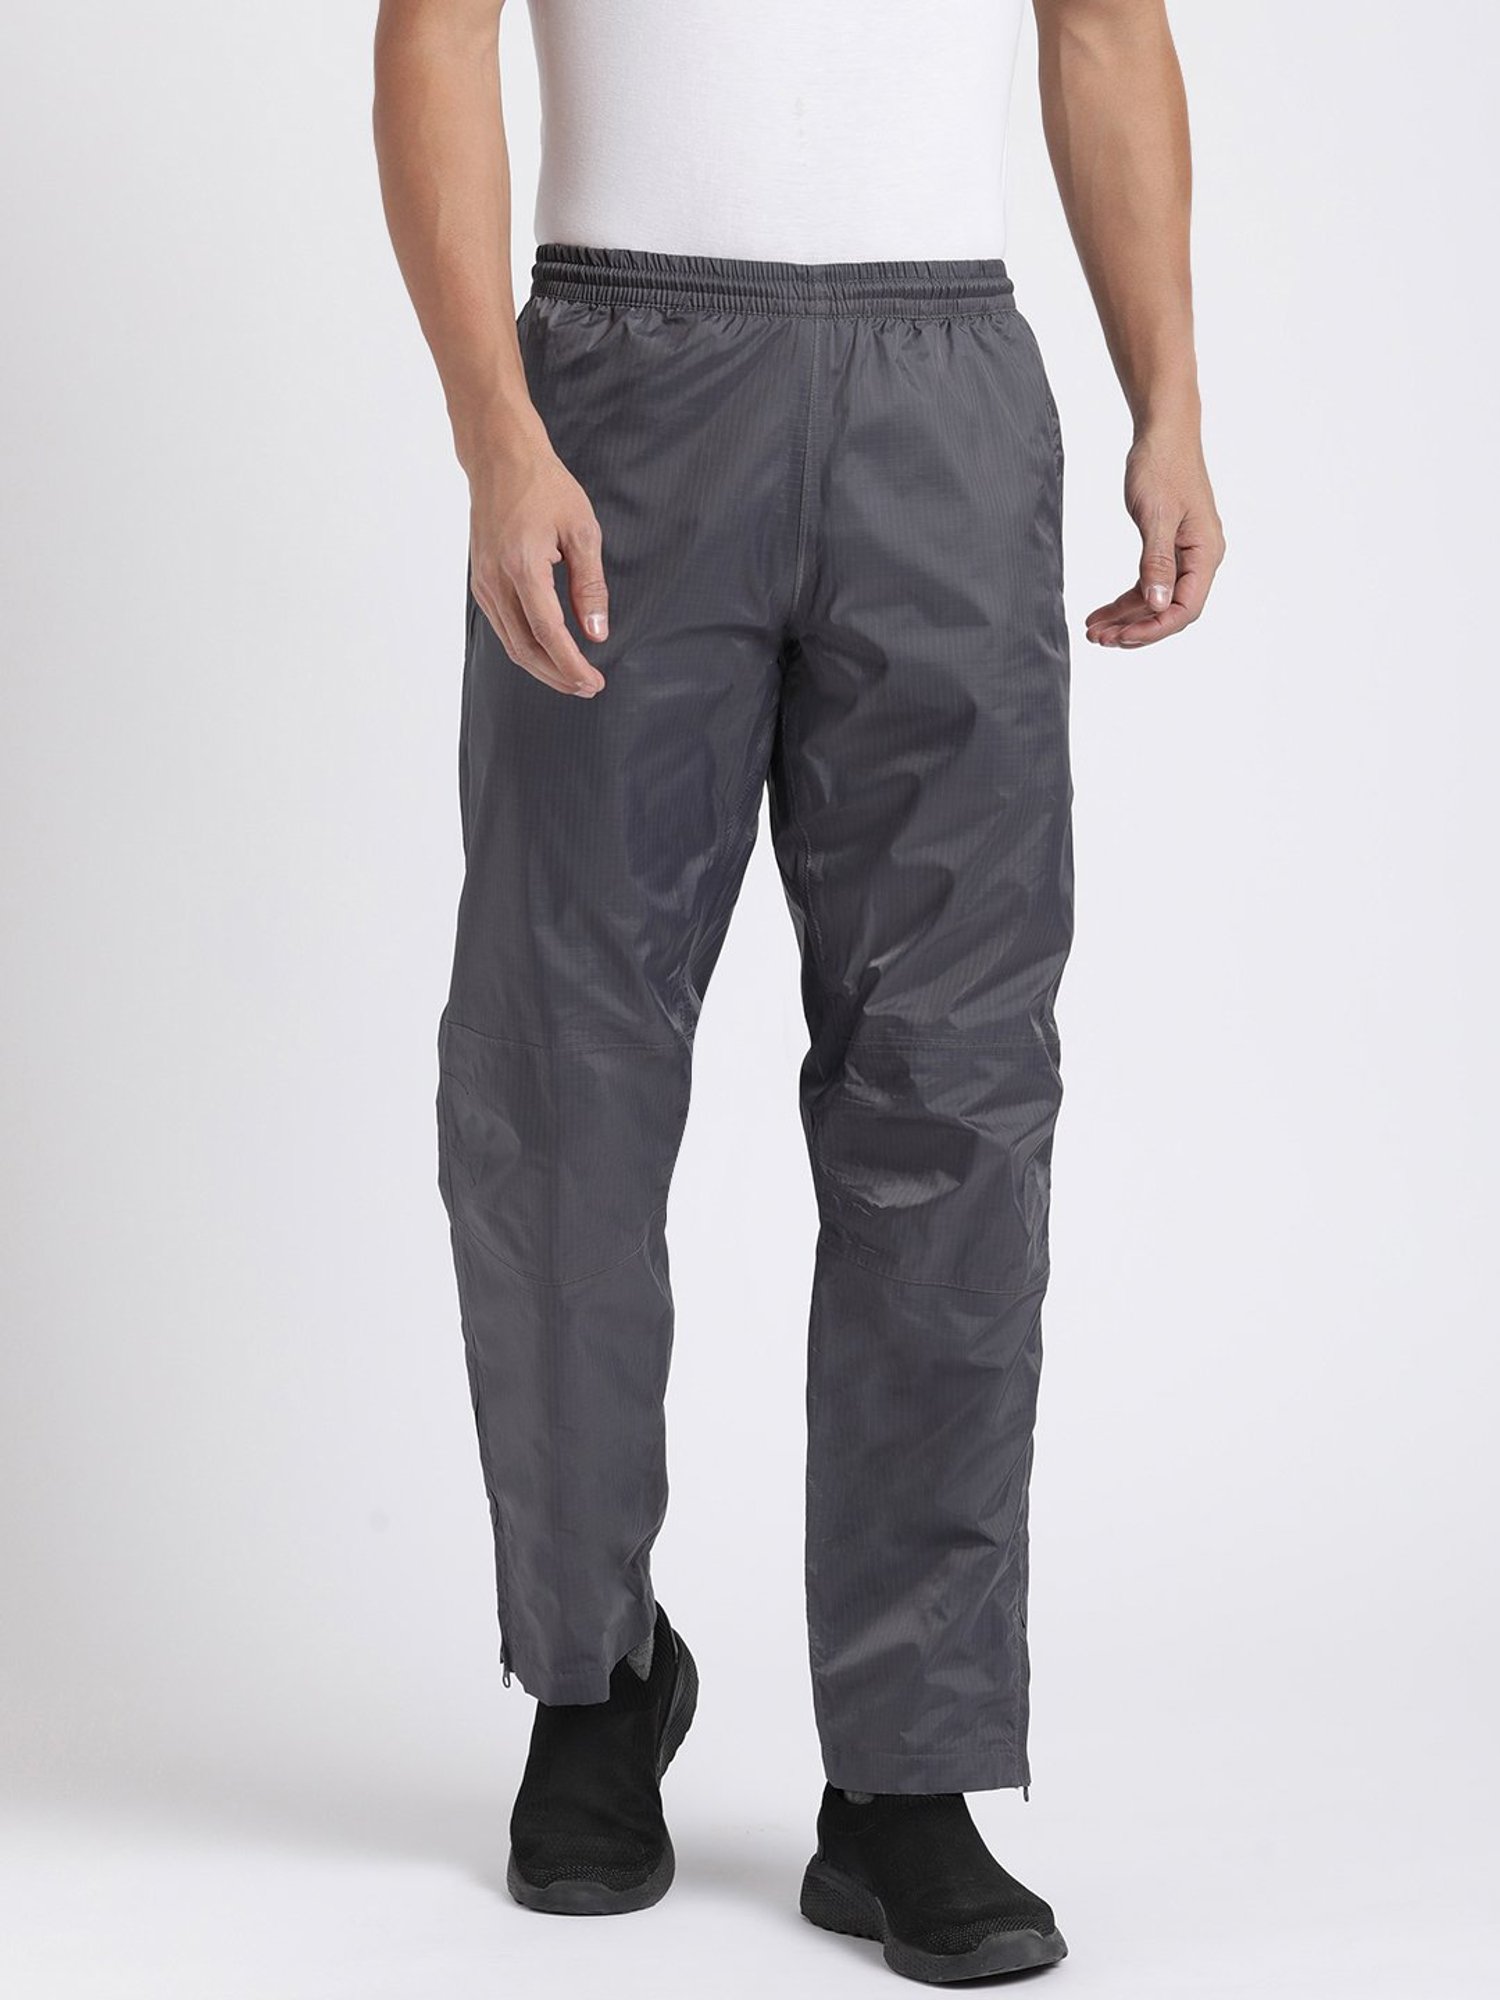 Polyester Wildcraft HypaDry Grey Unisex Rain Cheater, Size: Medium And  Large at Rs 1495 in Bengaluru